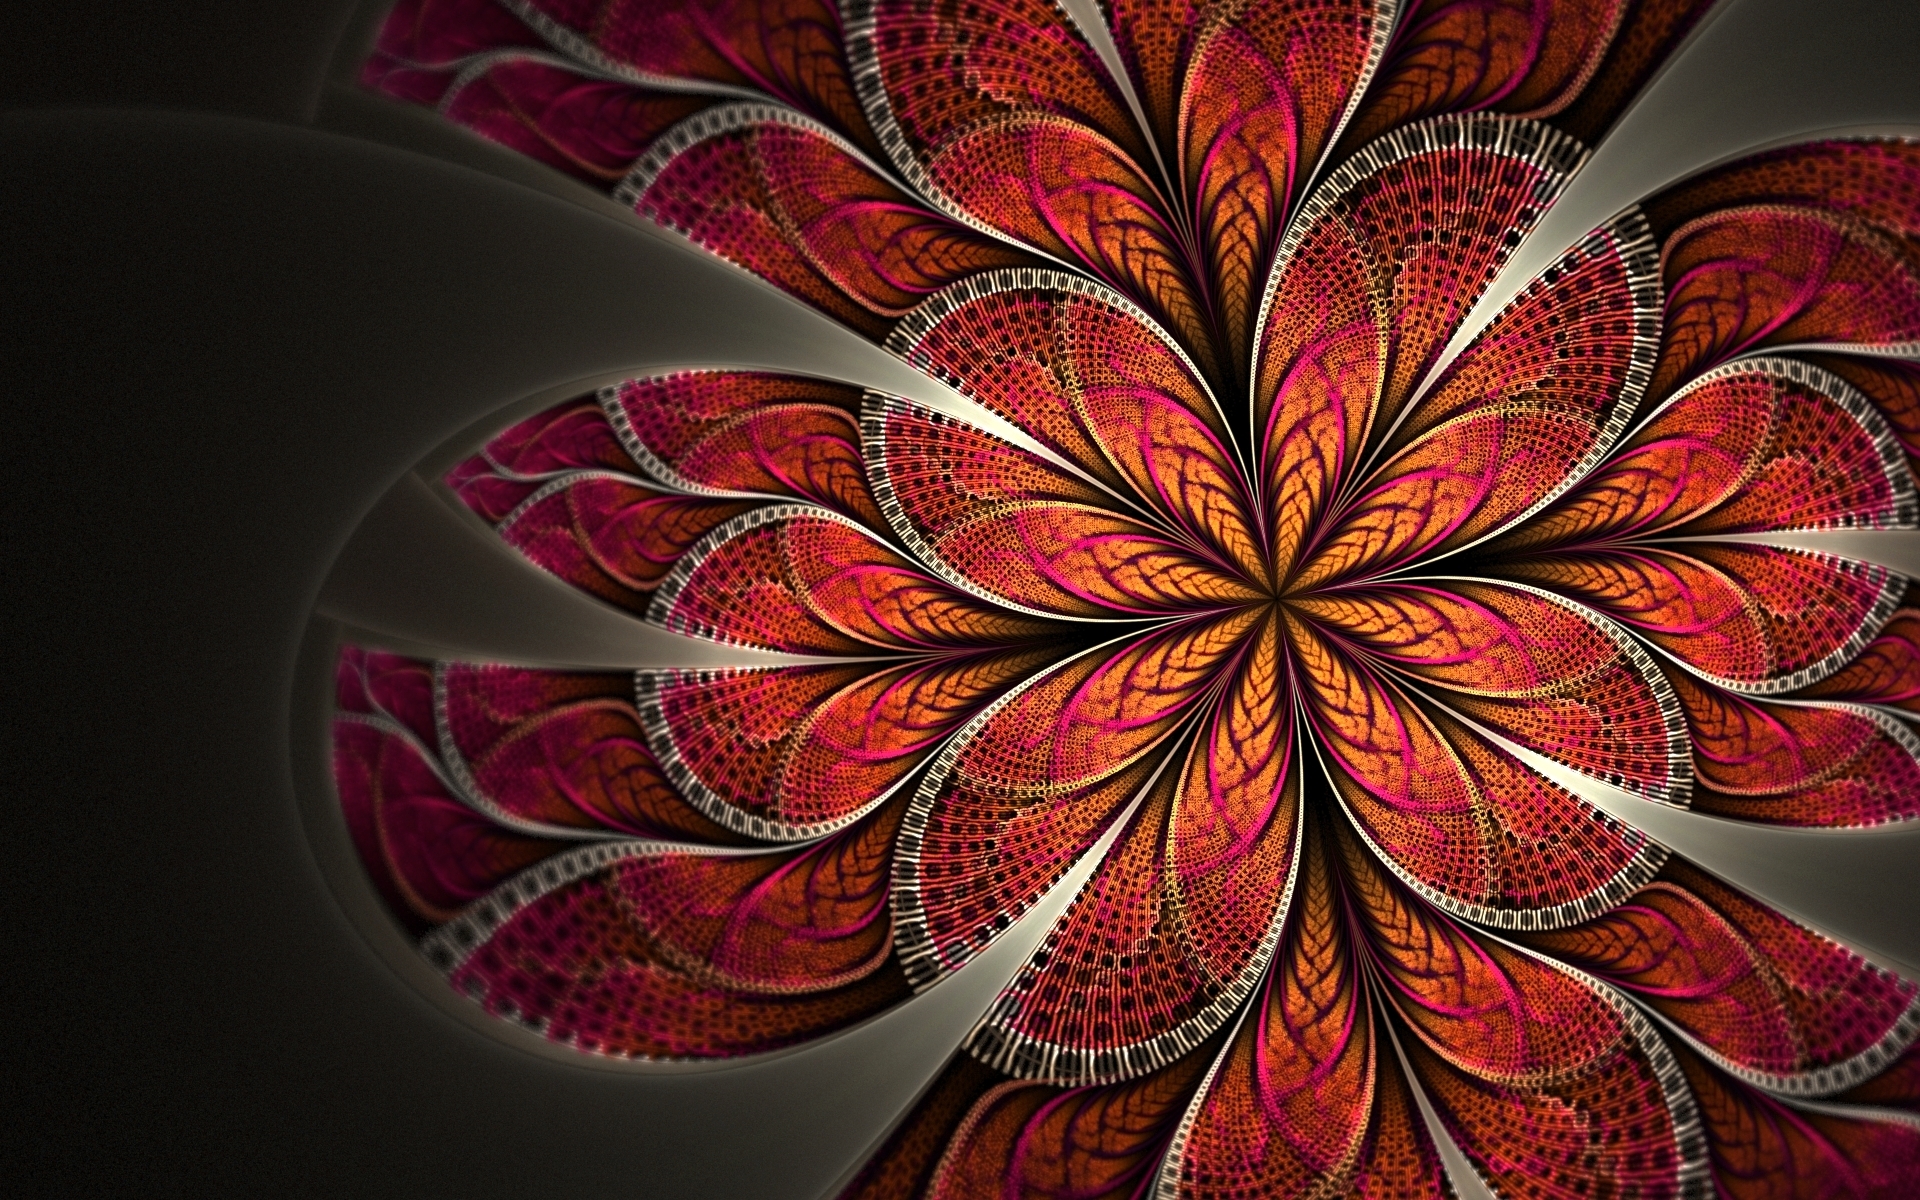 Abstract Flower Pattern